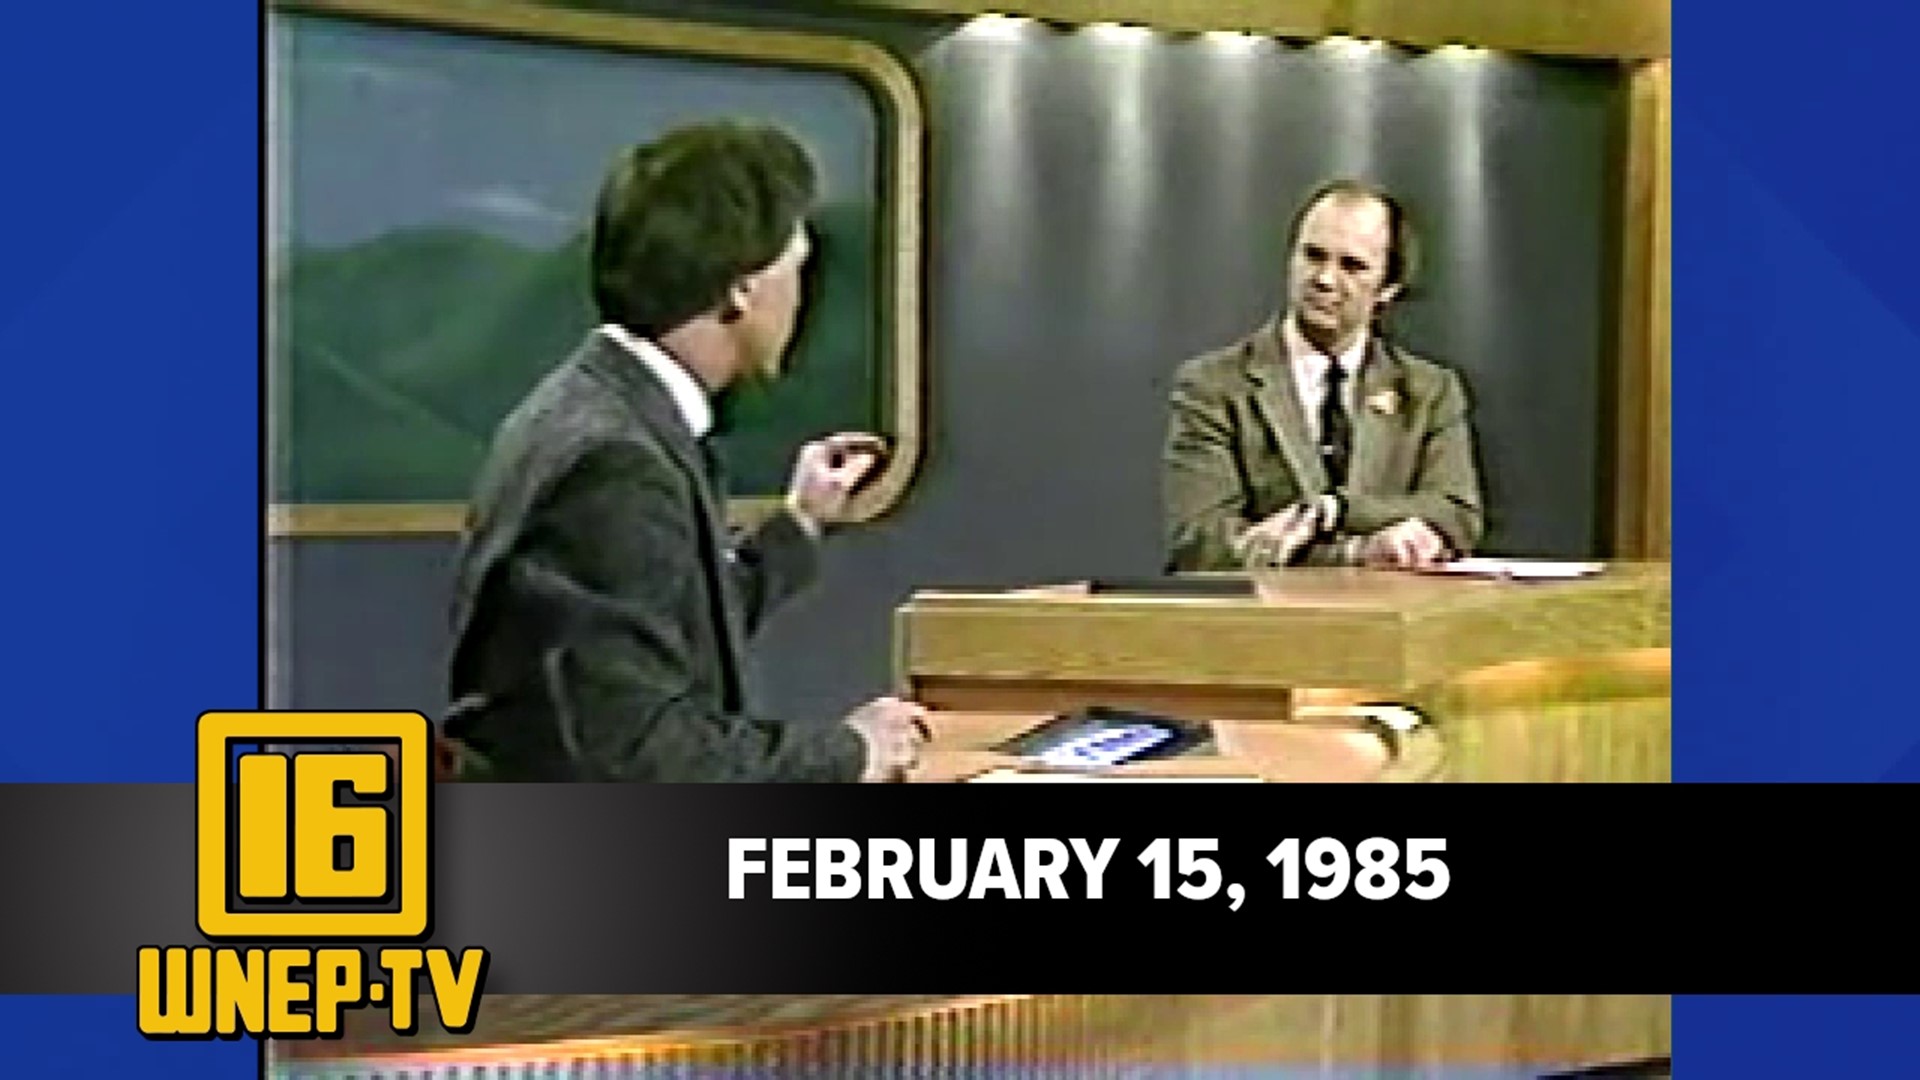 Join Frank Andrews with curated stories from February 15, 1985.